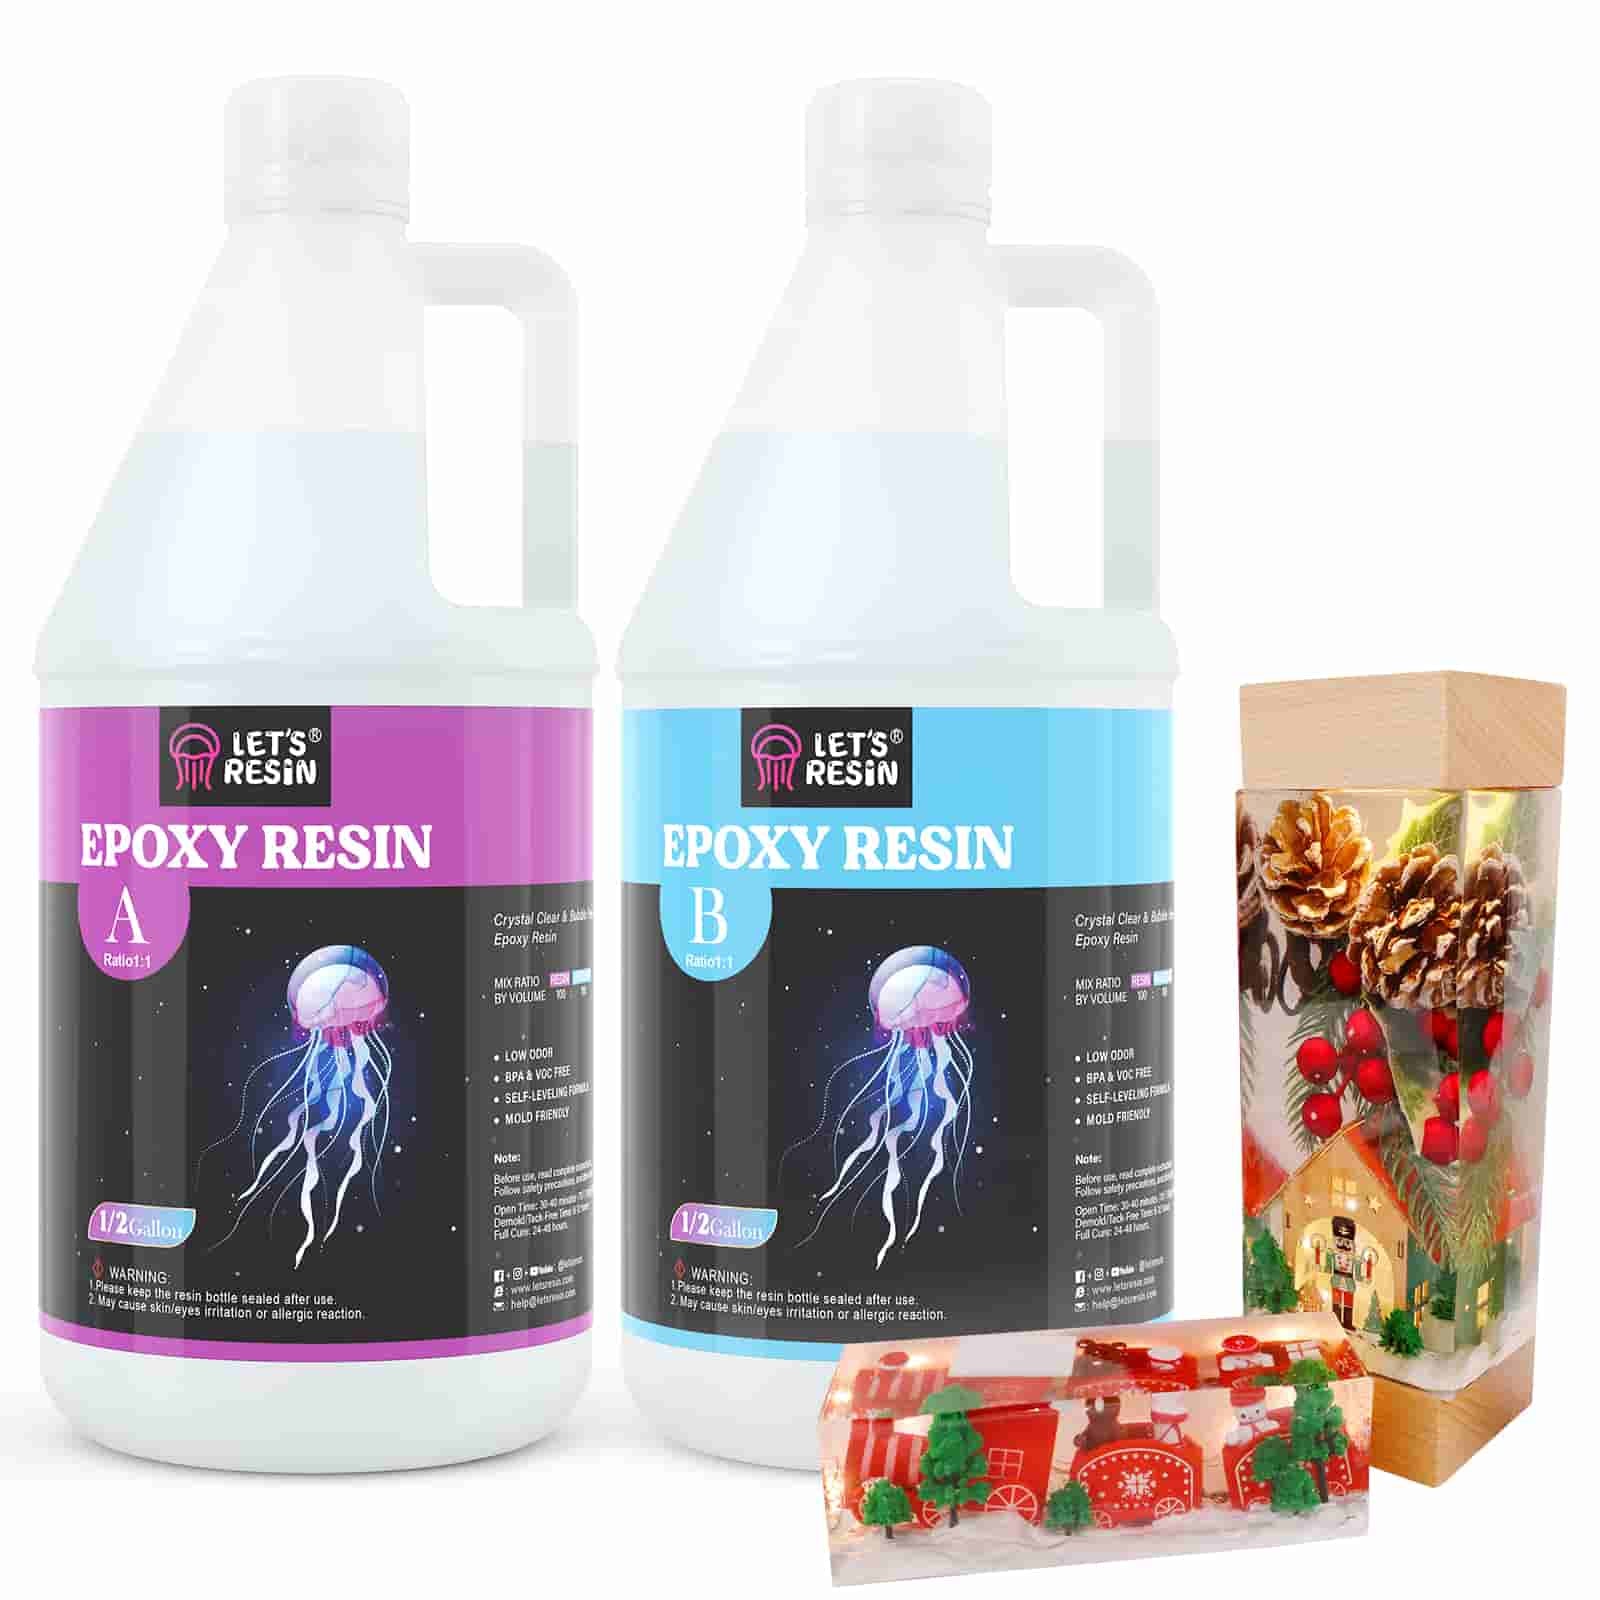 2 part epoxy resin, 1 gallon kit, clear resin, crafts, art, coating, self  leveling, easy to use (1-1 mixing)